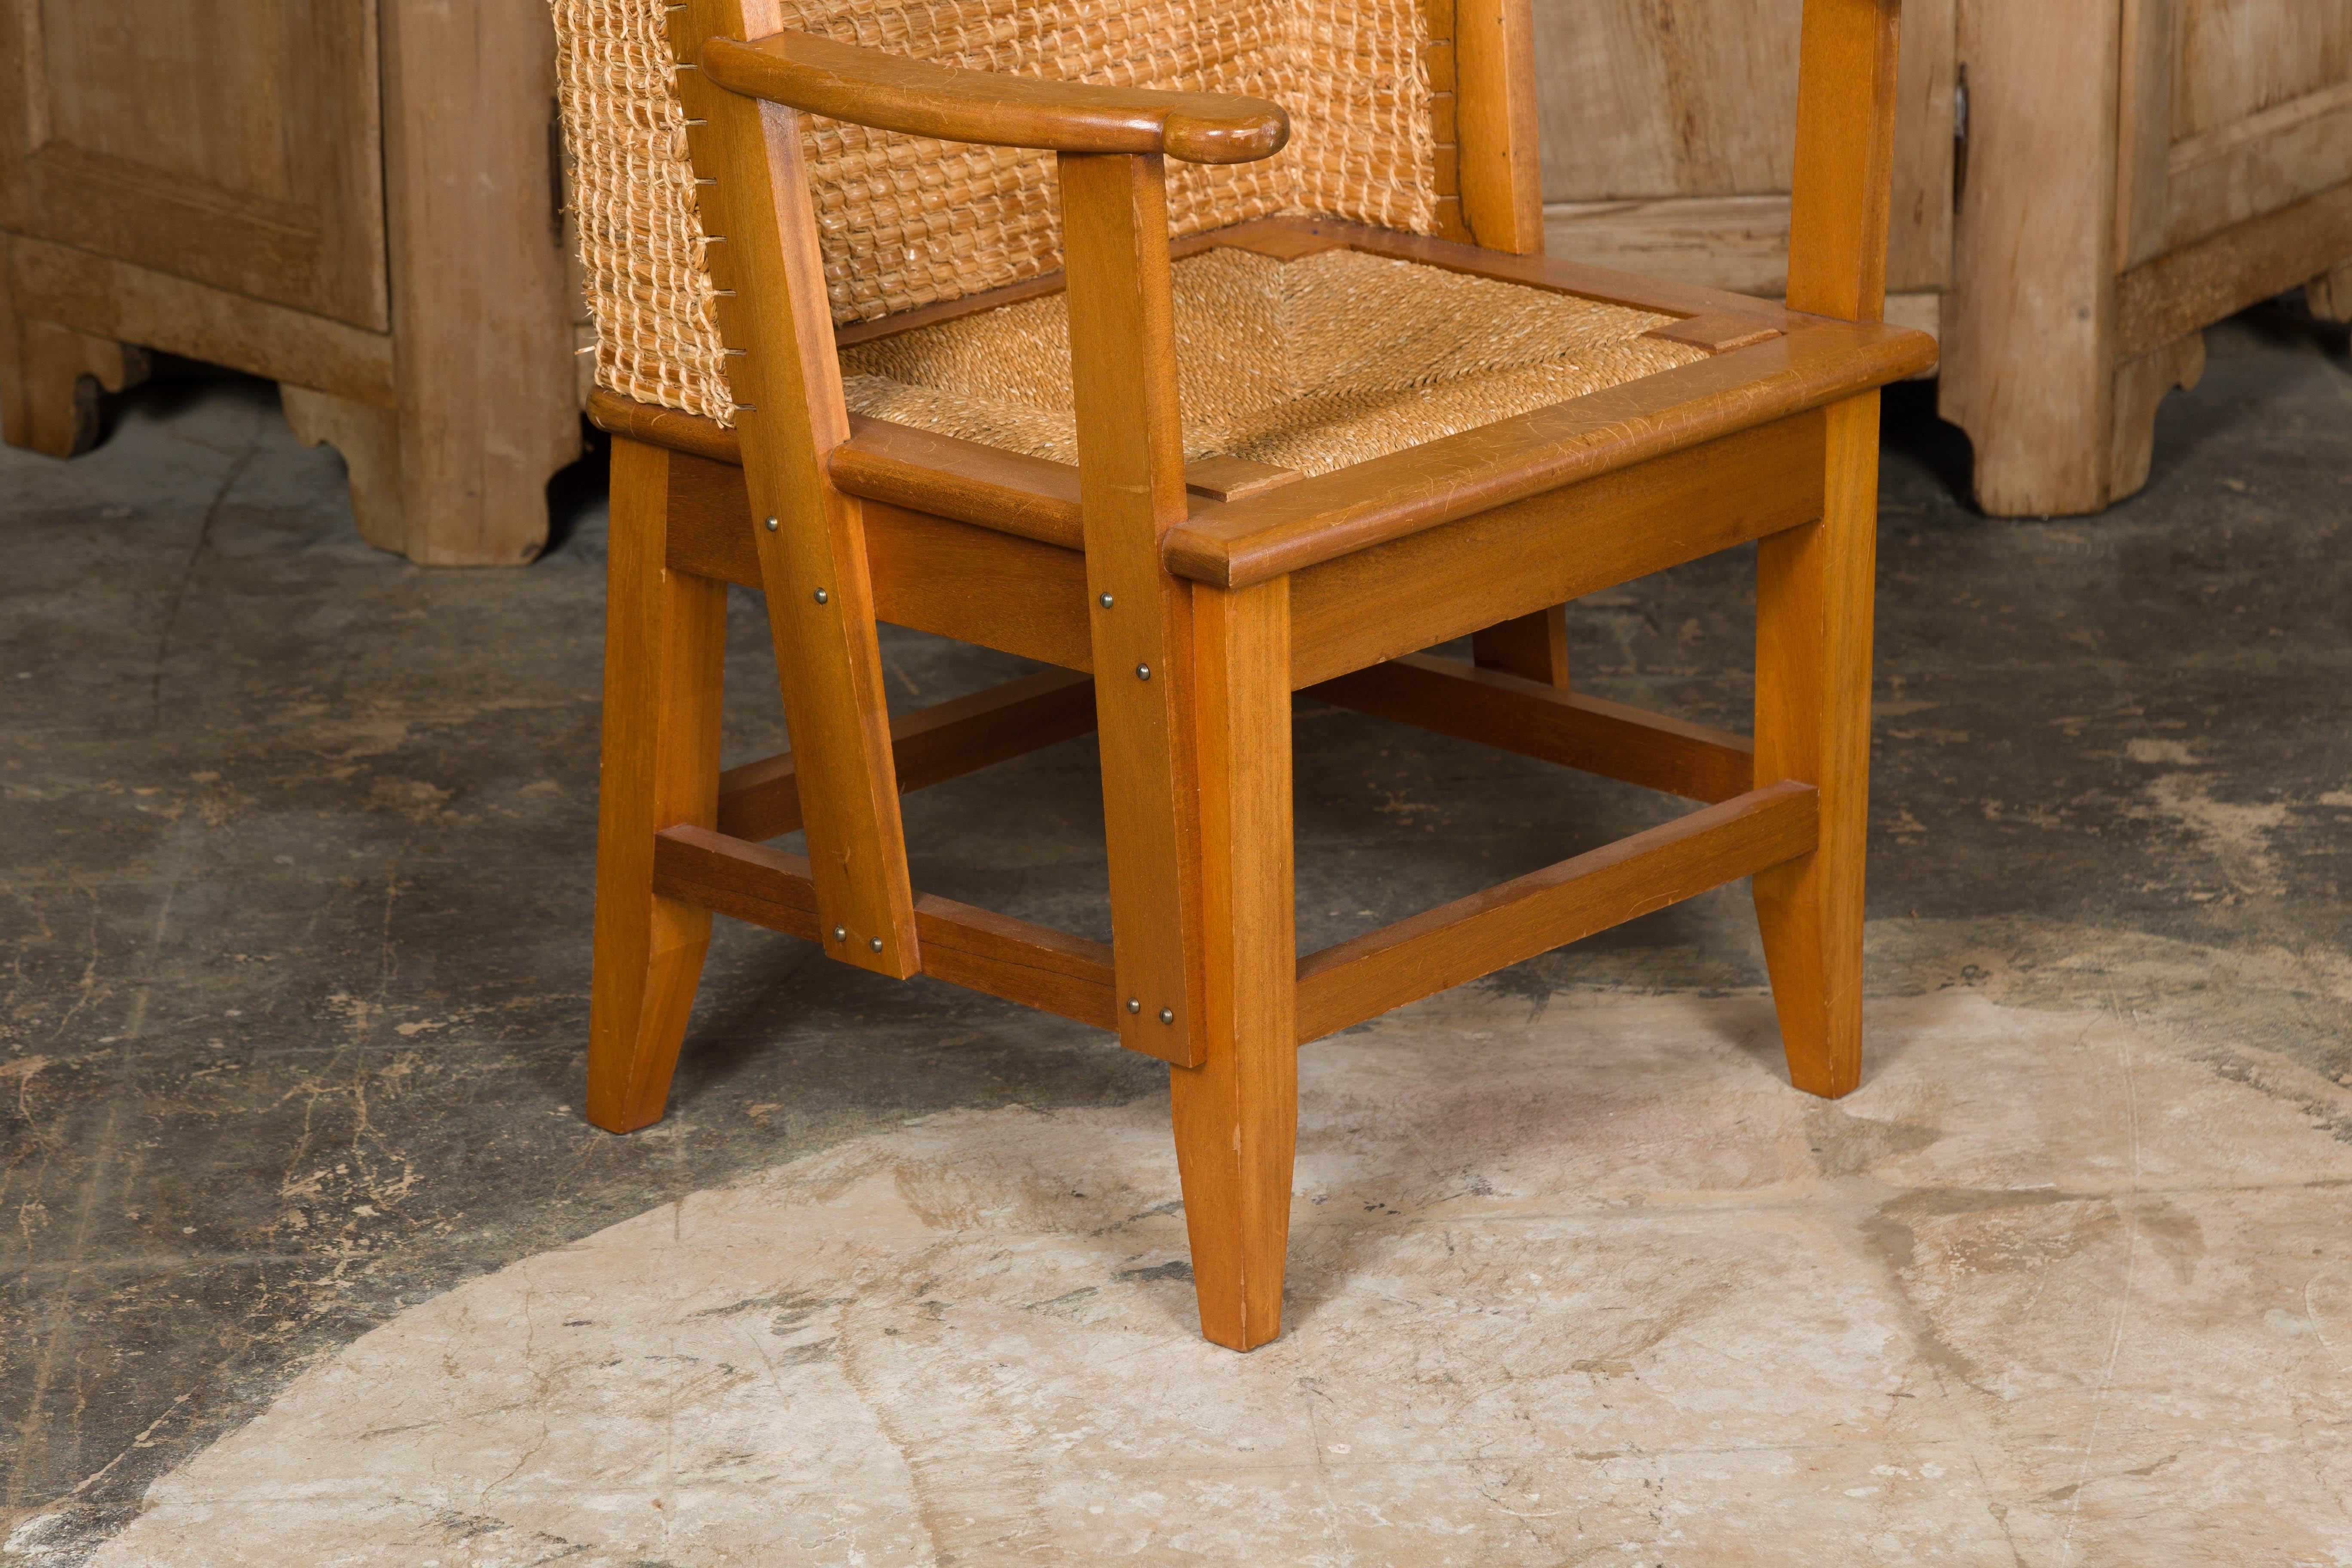 Orkney Island Midcentury Scottish Canopy Chair with Hand Woven Straw Back For Sale 5